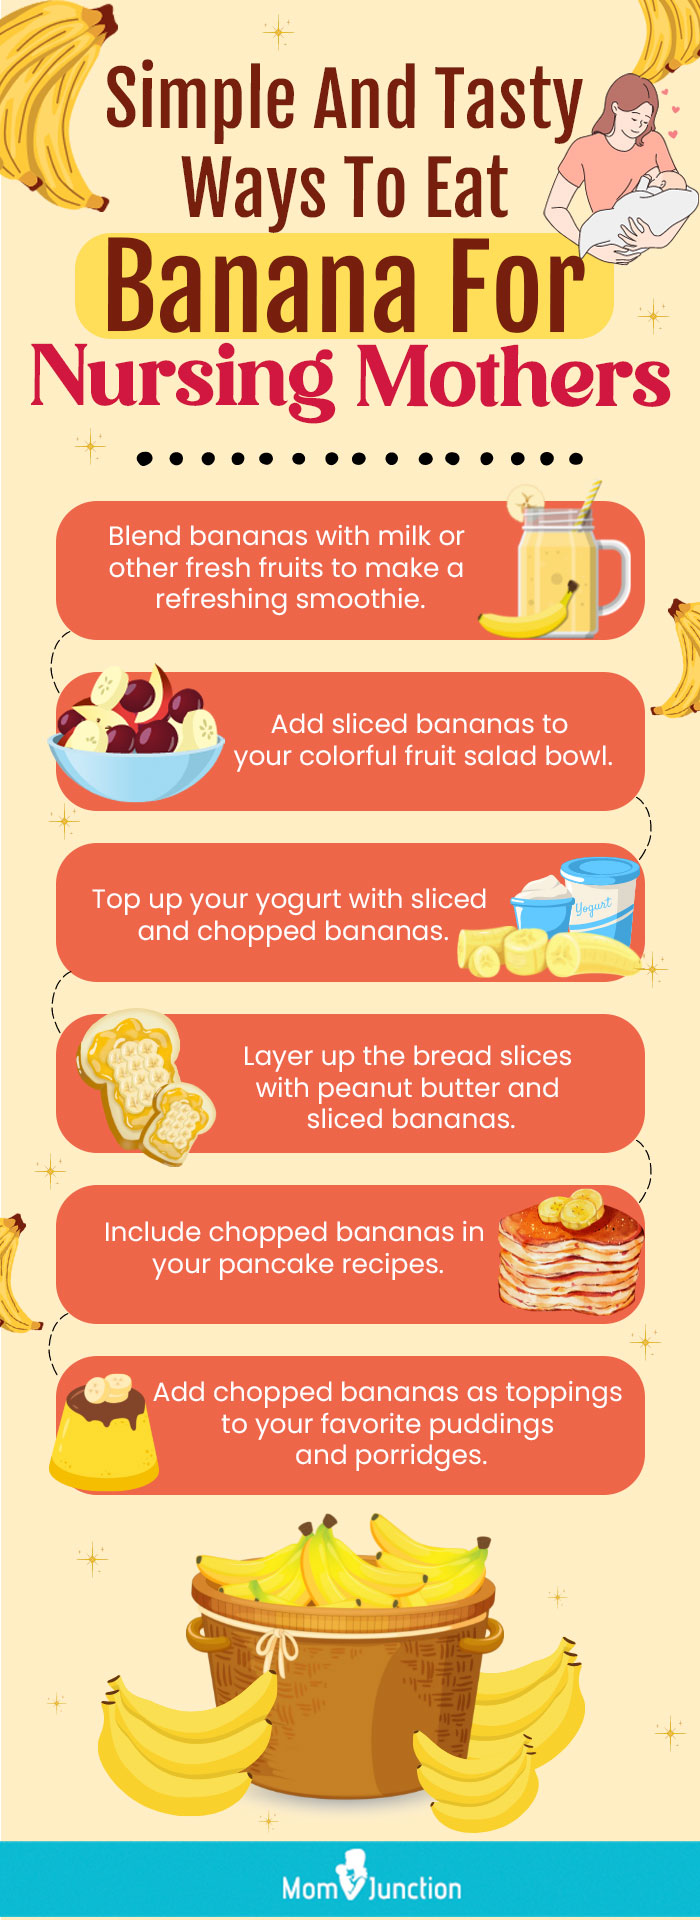 simple-and-tasty-ways-to-eat-banana-for-nursing-mother (infographic)